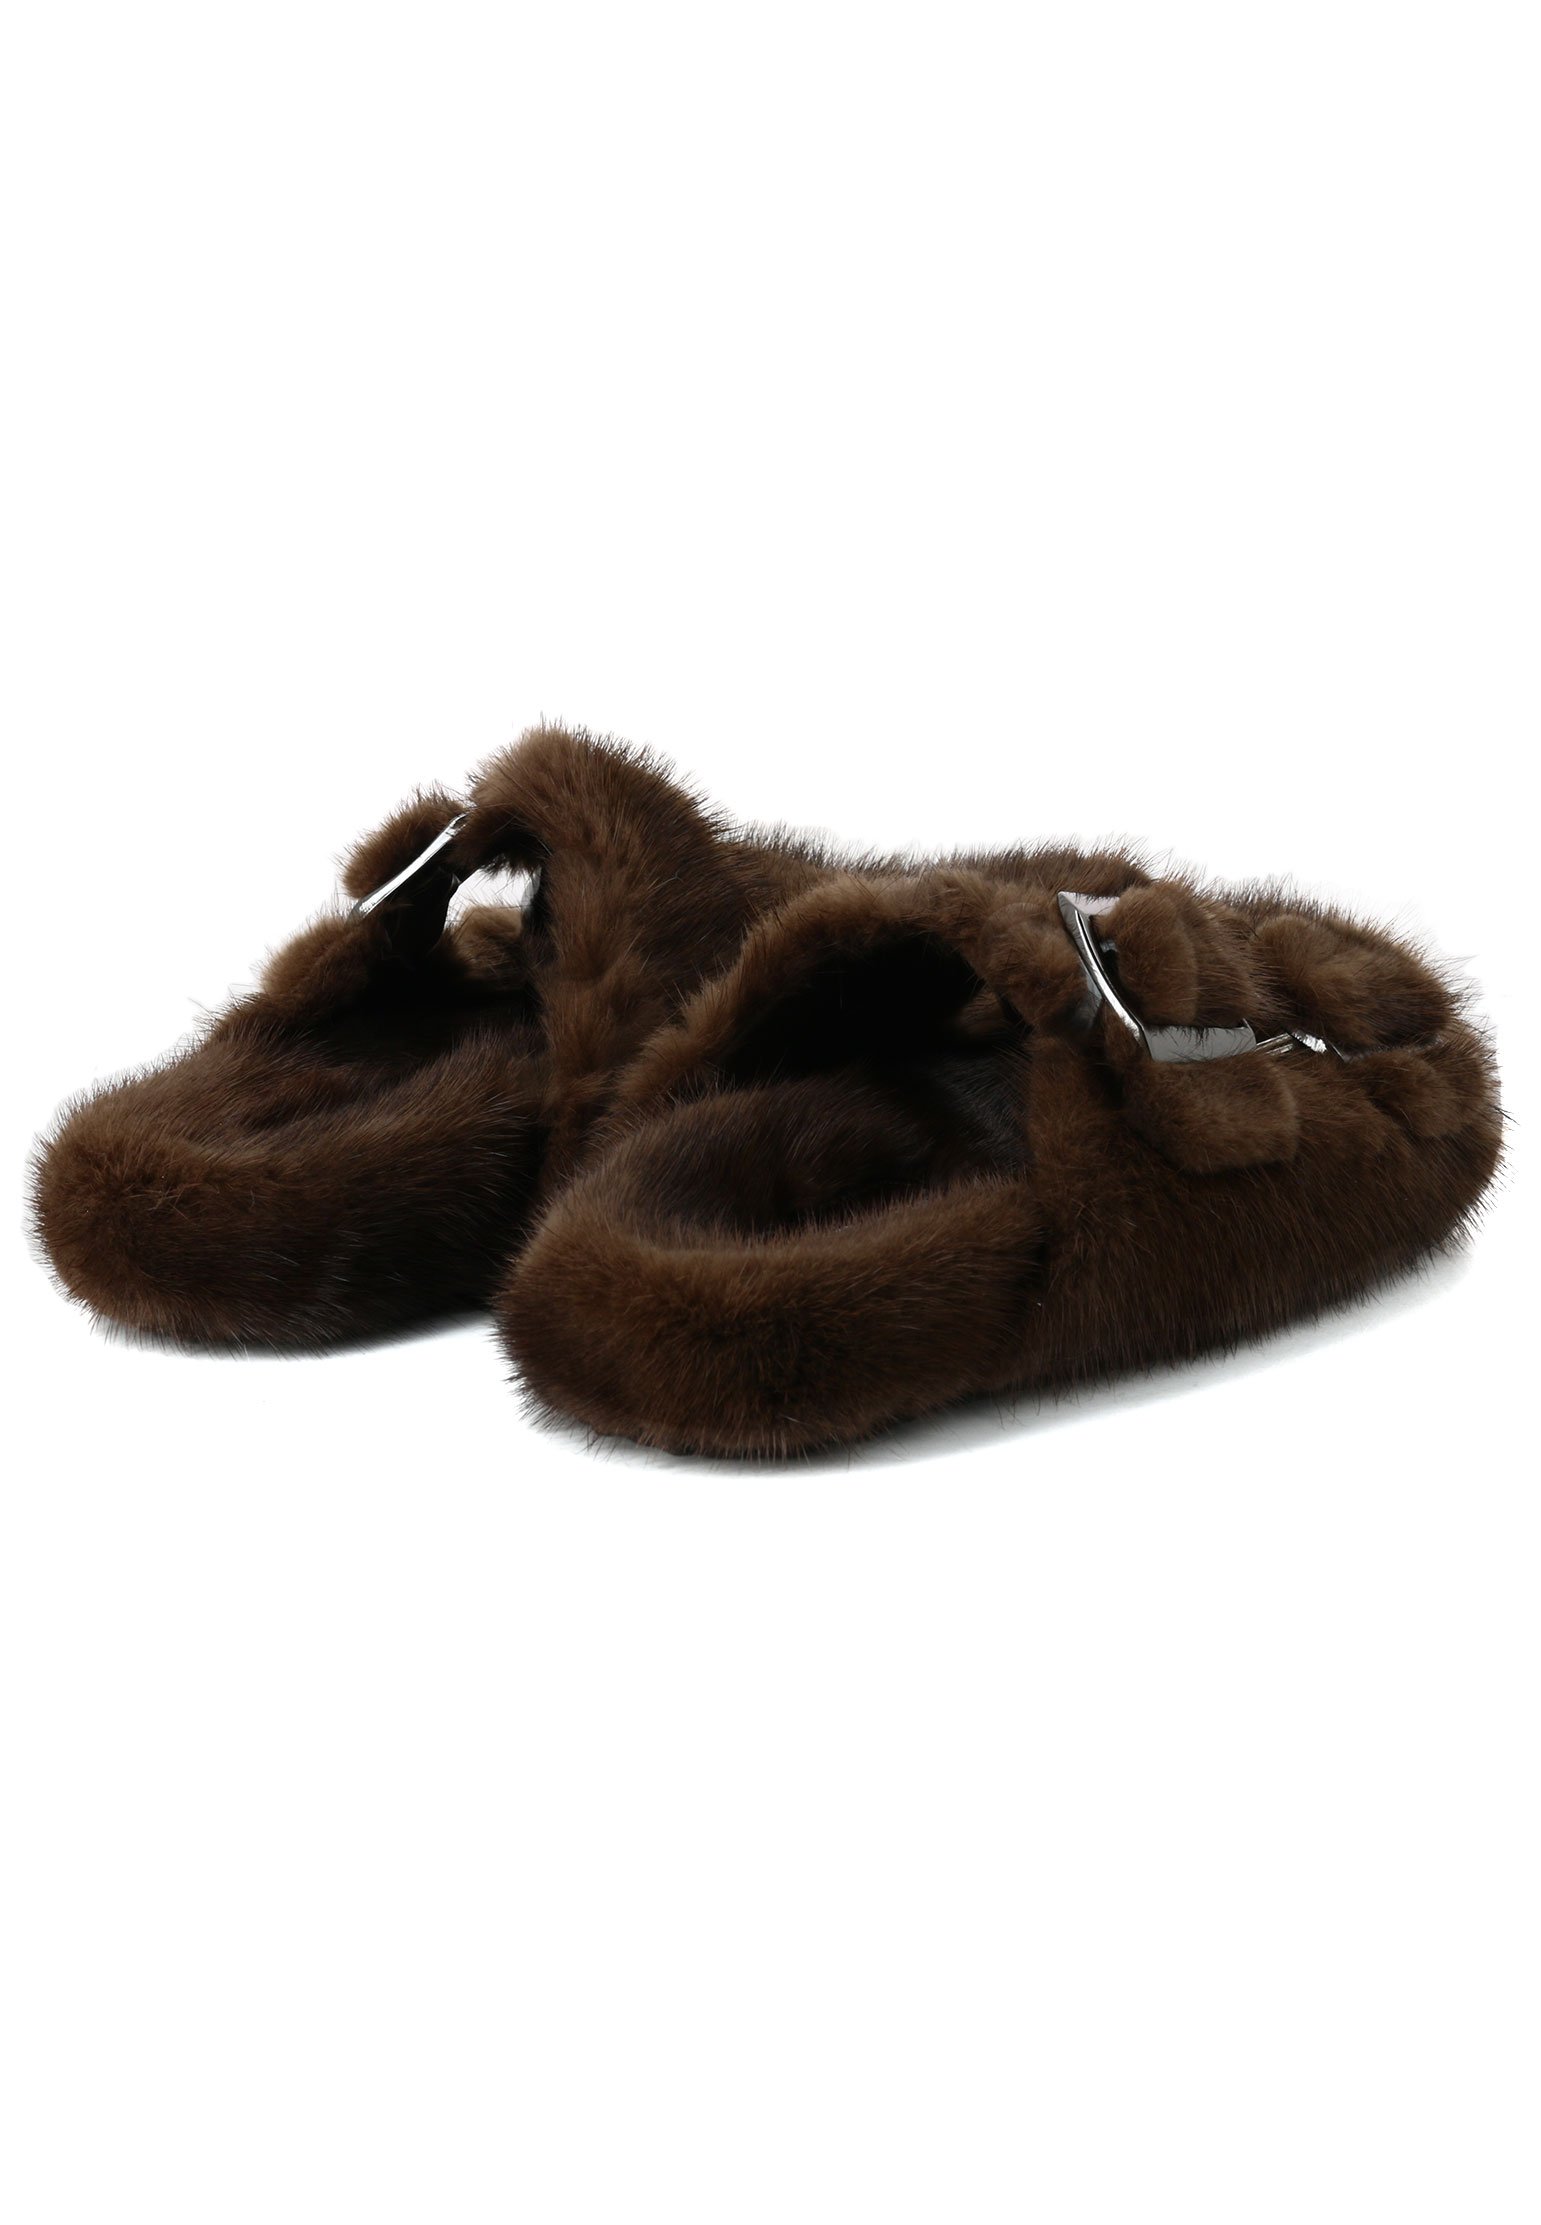 Slippers SAM RONE Color: brown (Code: 217) in online store Allure